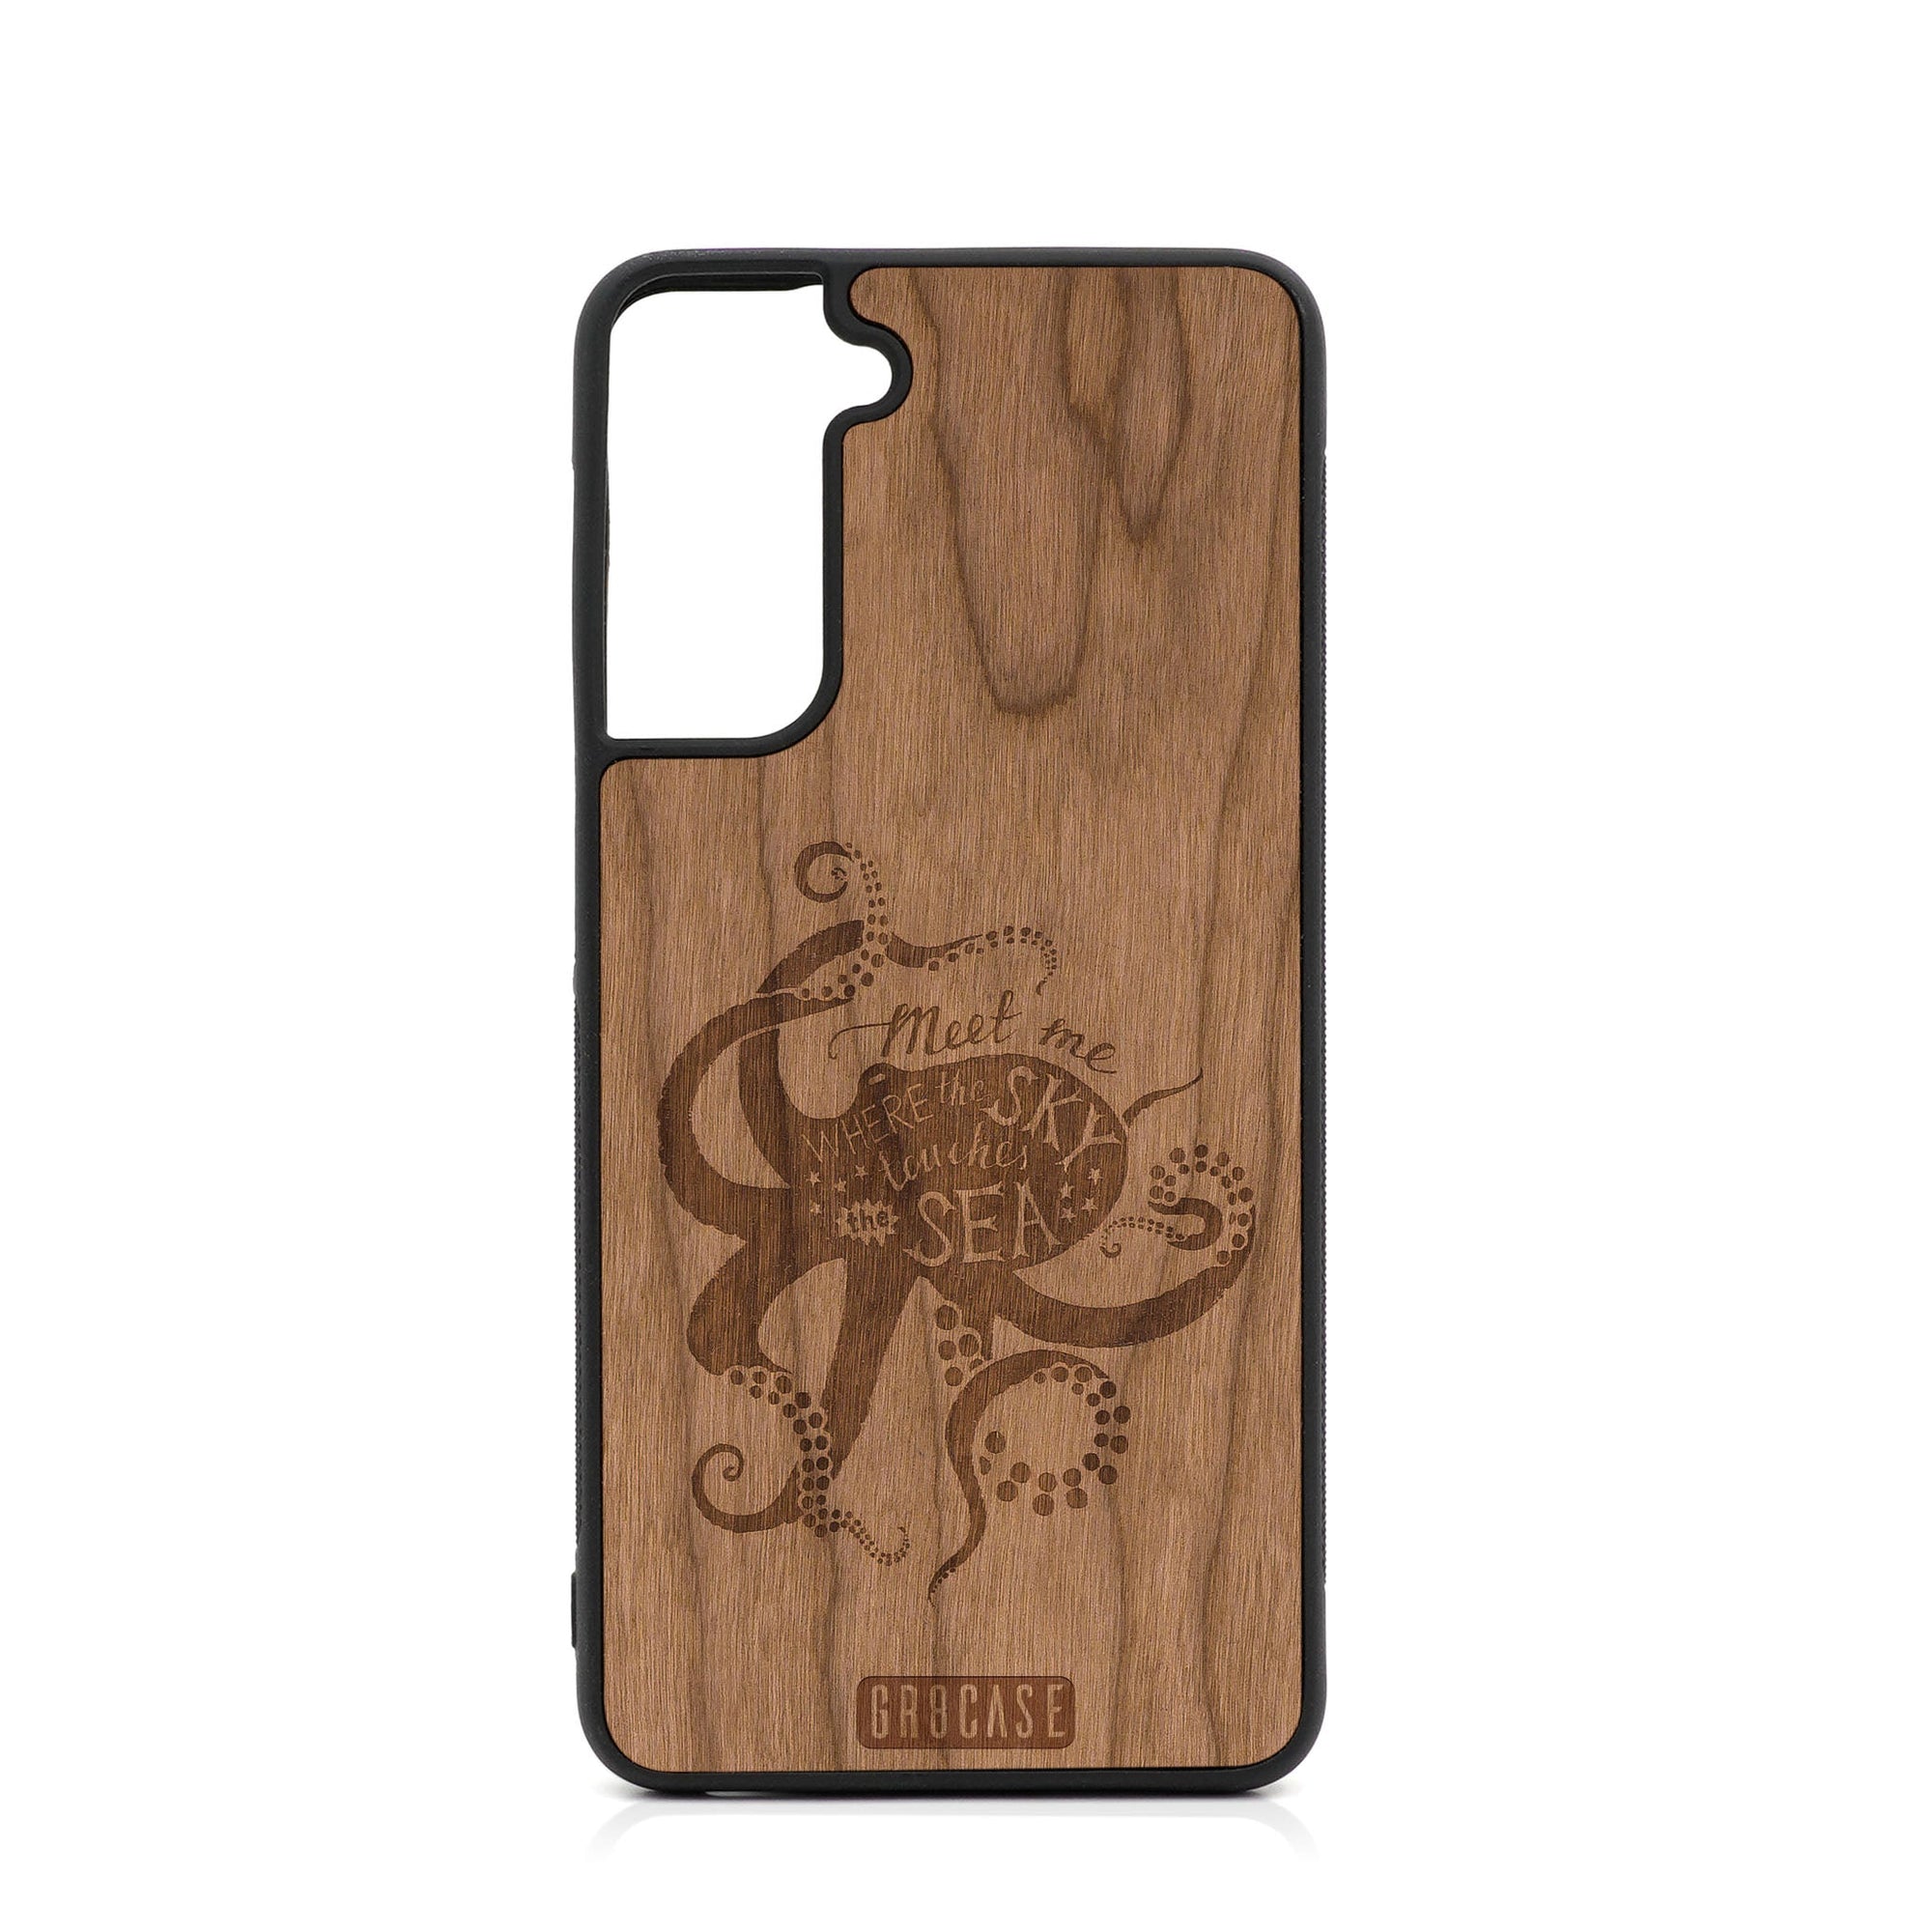 Meet Me Where The Sky Touches The Sea (Octopus) Design Wood Case For Samsung Galaxy S22